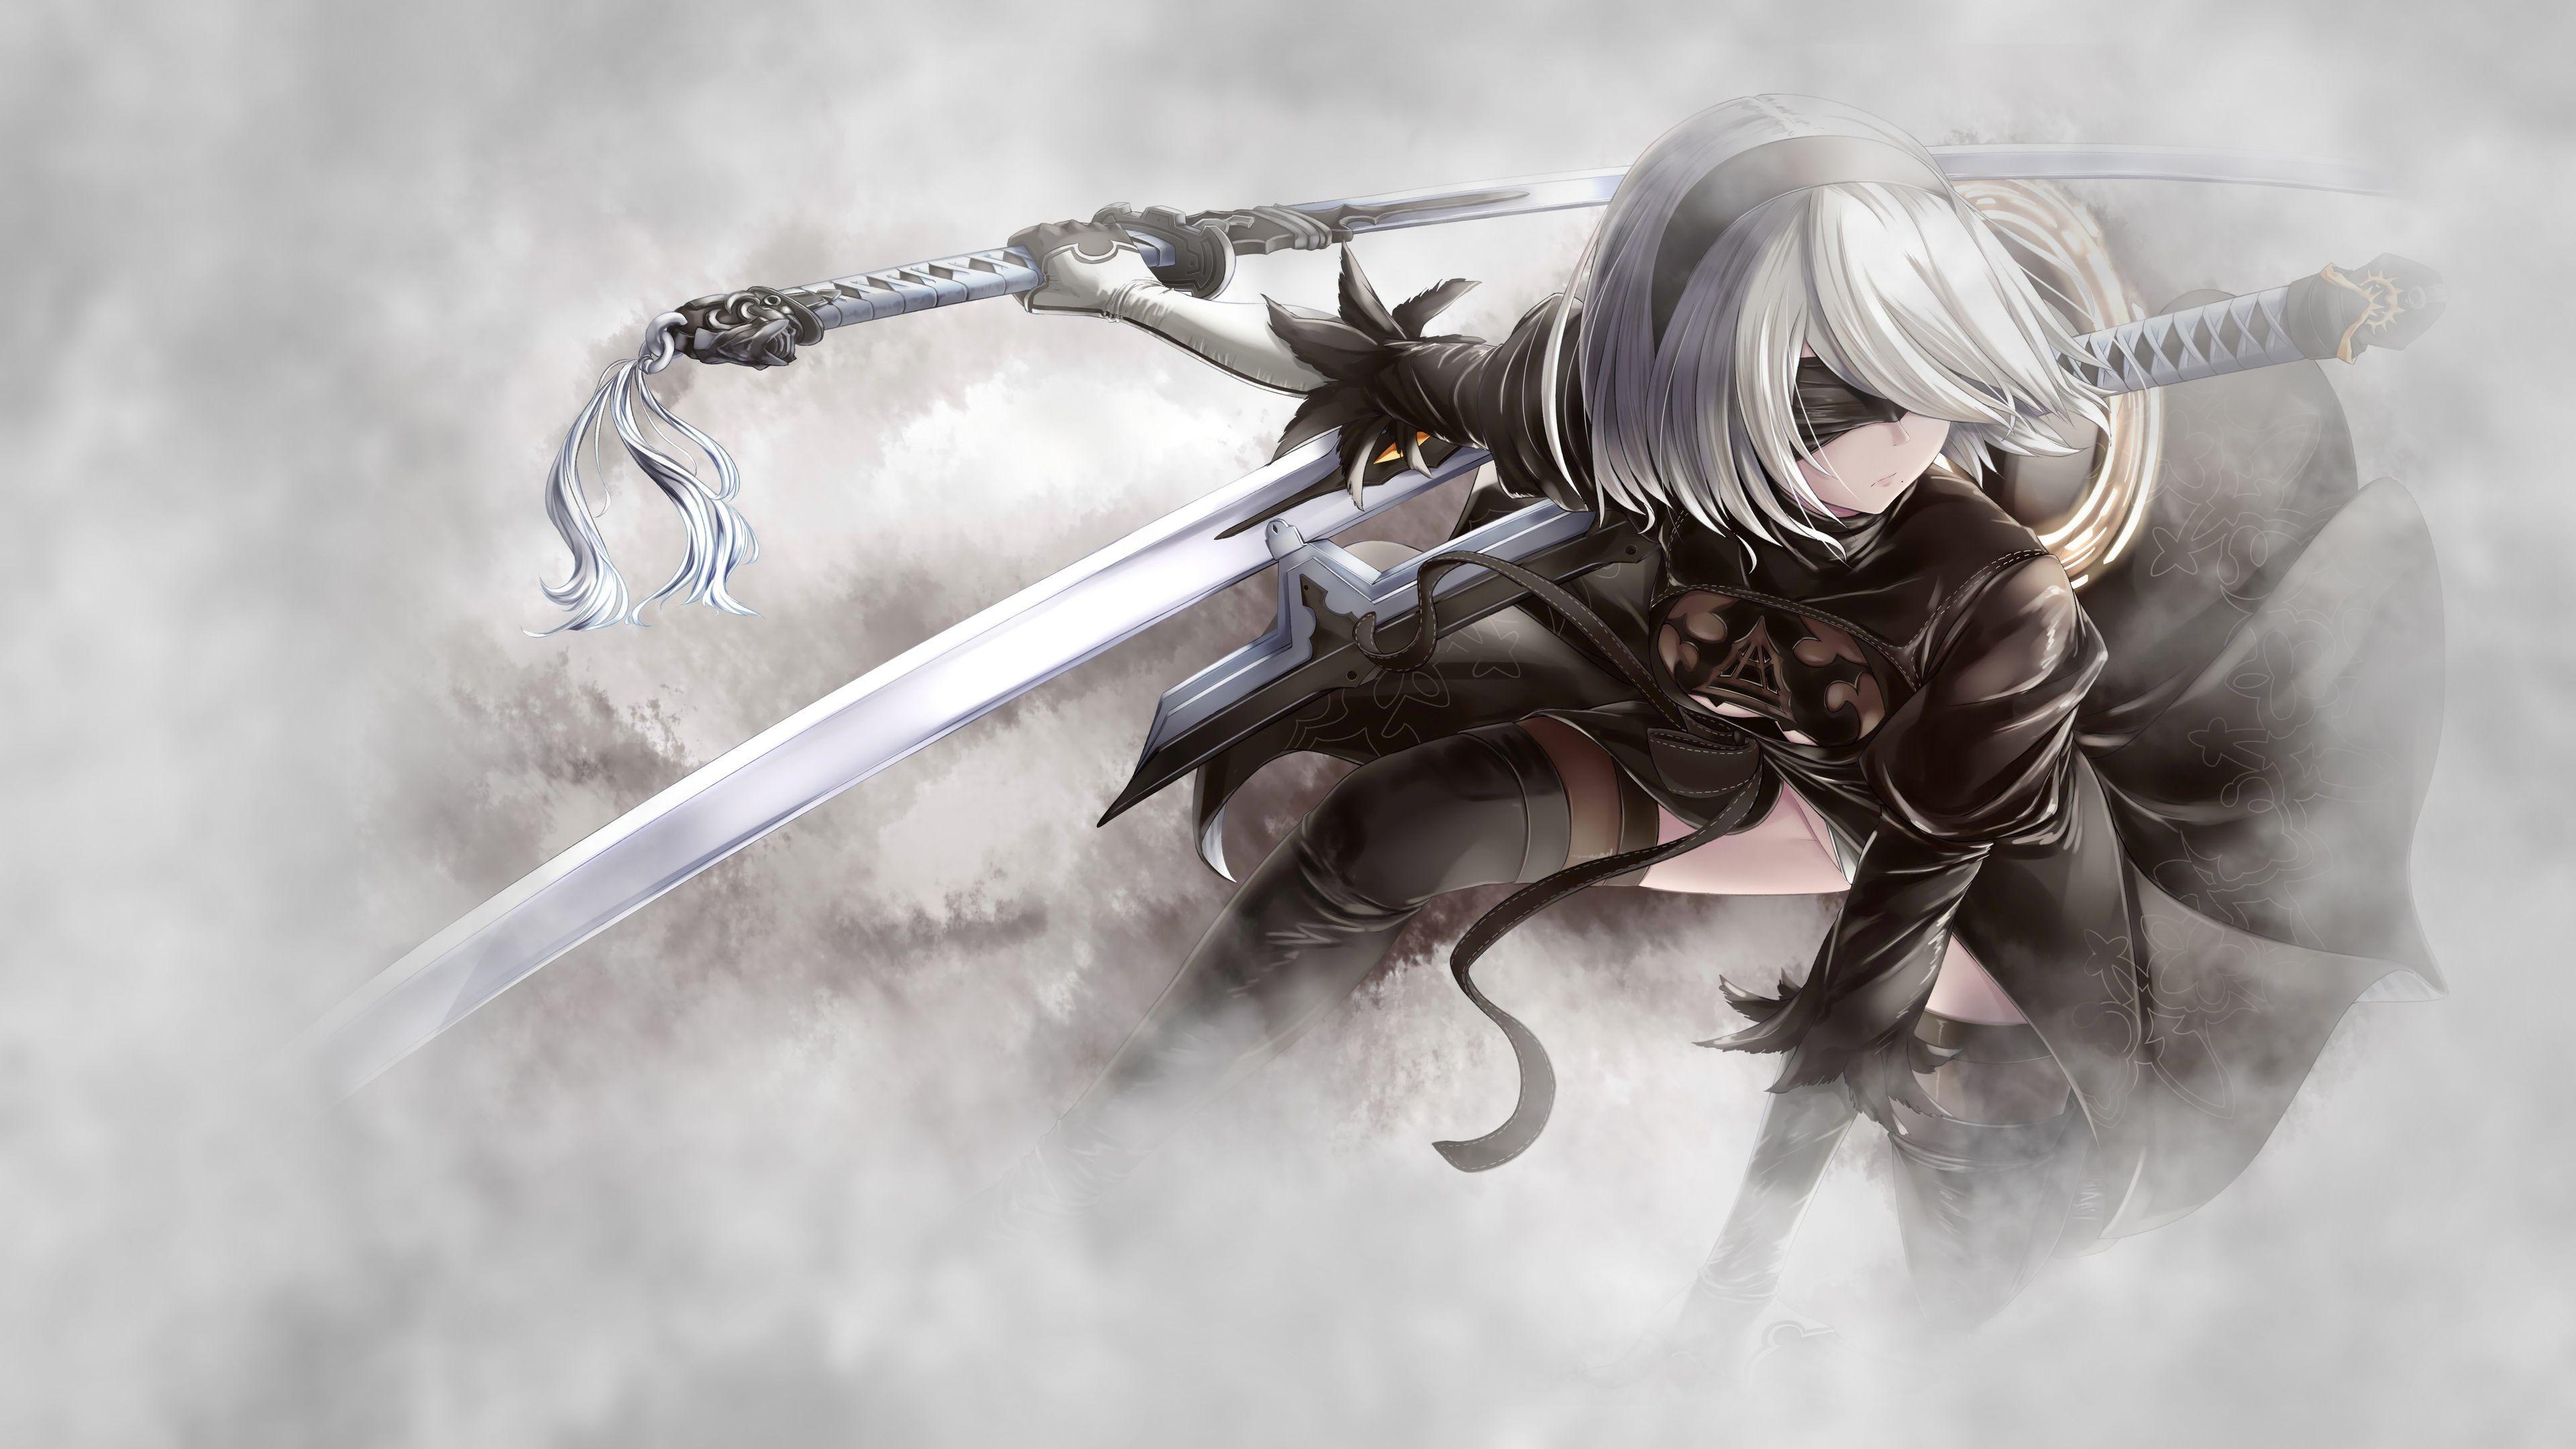 nier automata pc games free download full version for windows 7